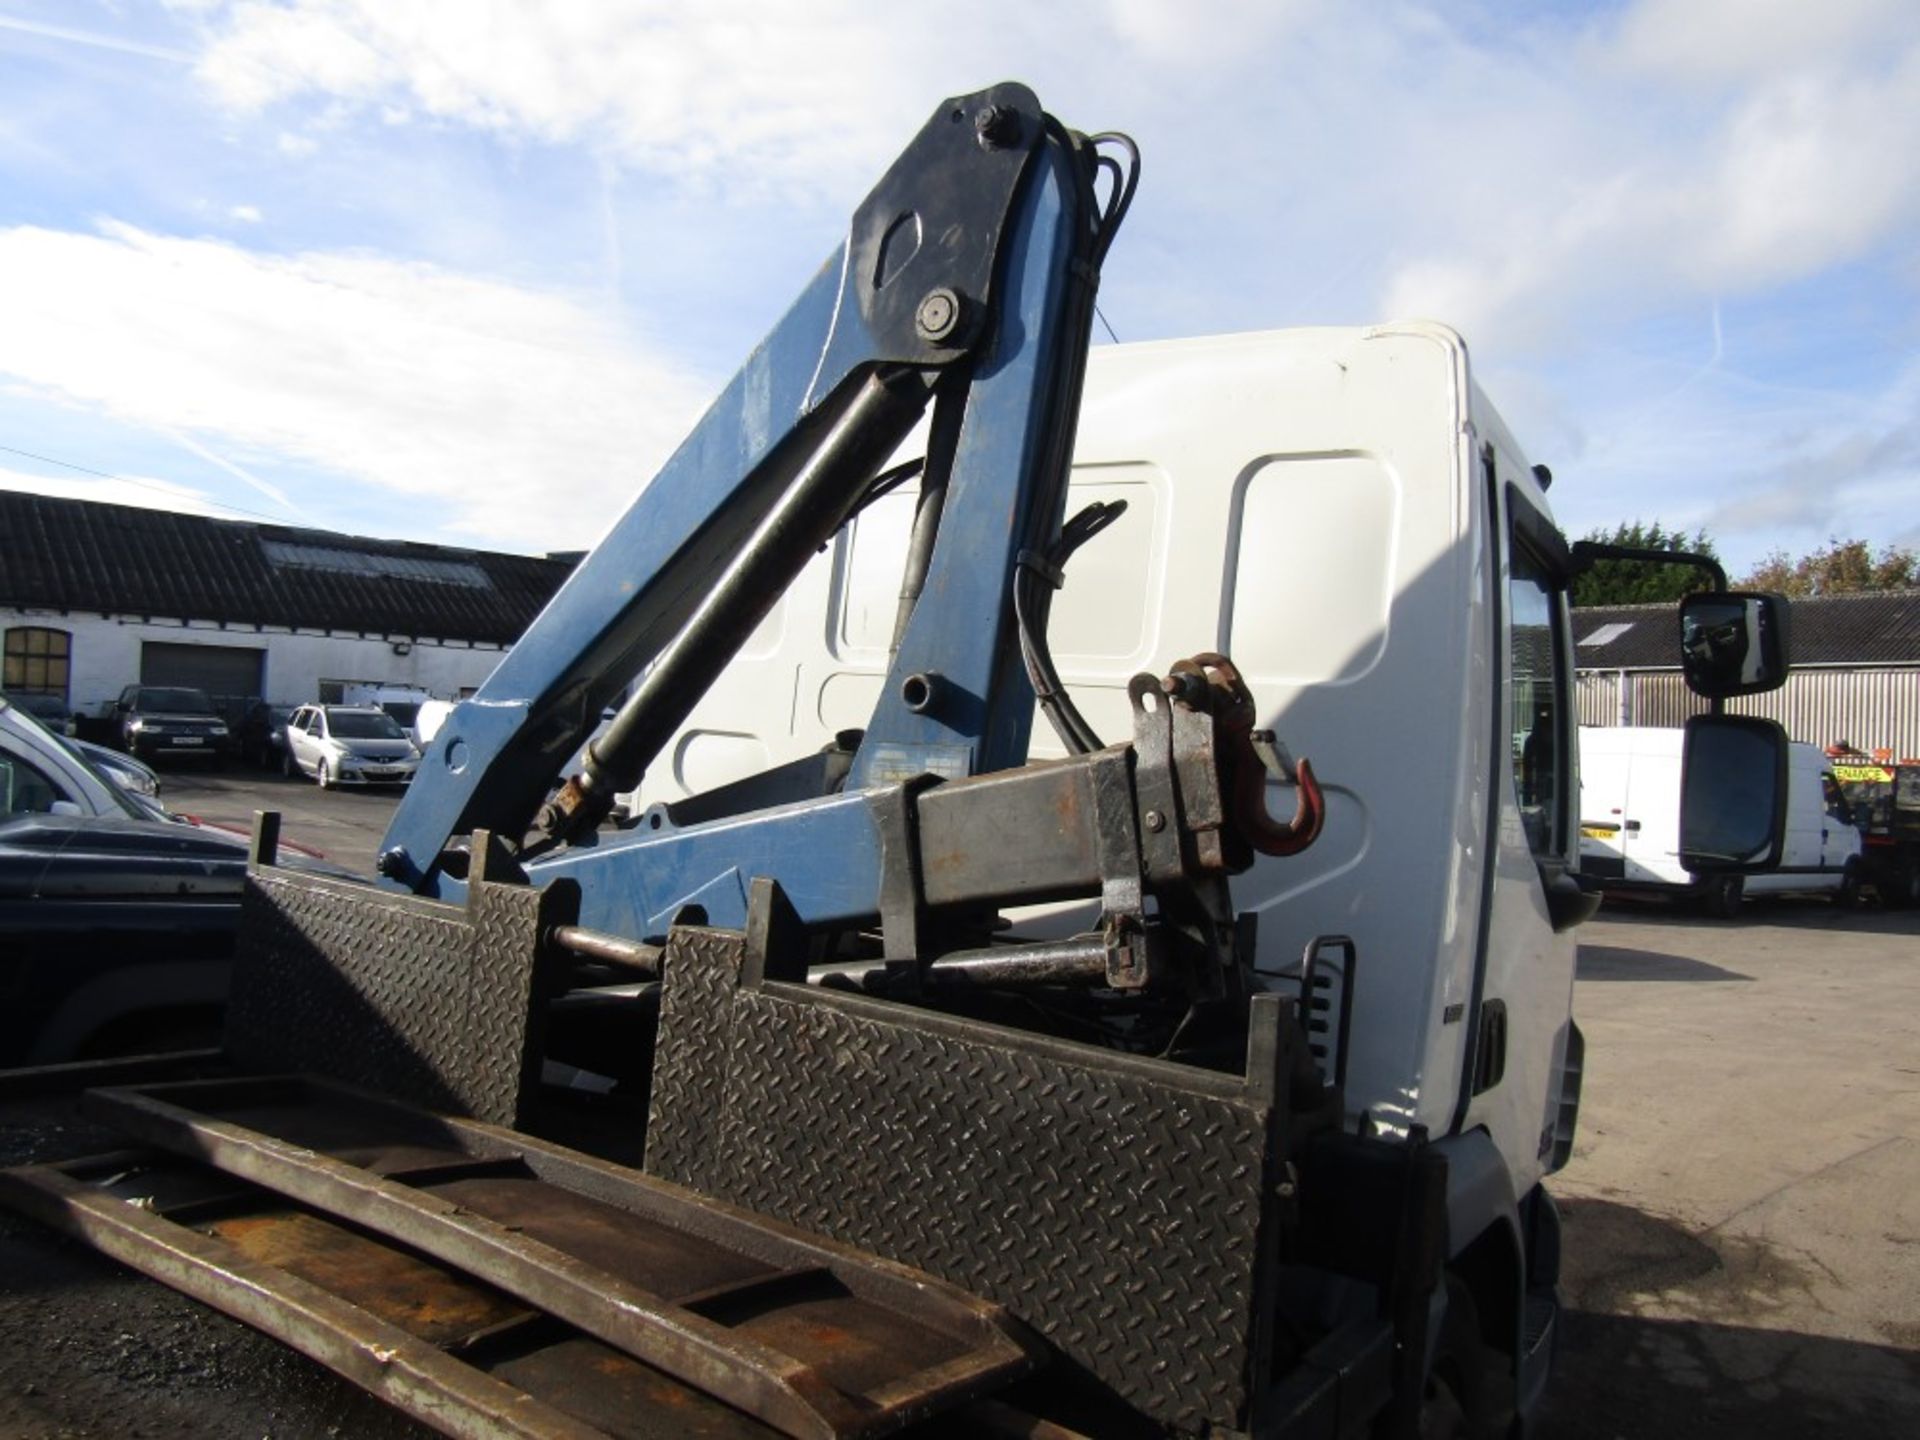 61 reg DAF FA LF45 RECOVERY C/W HIAB, 1ST REG 10/11, V5 HERE, 3 FORMER KEEPERS ]NO VAT] - Image 5 of 7